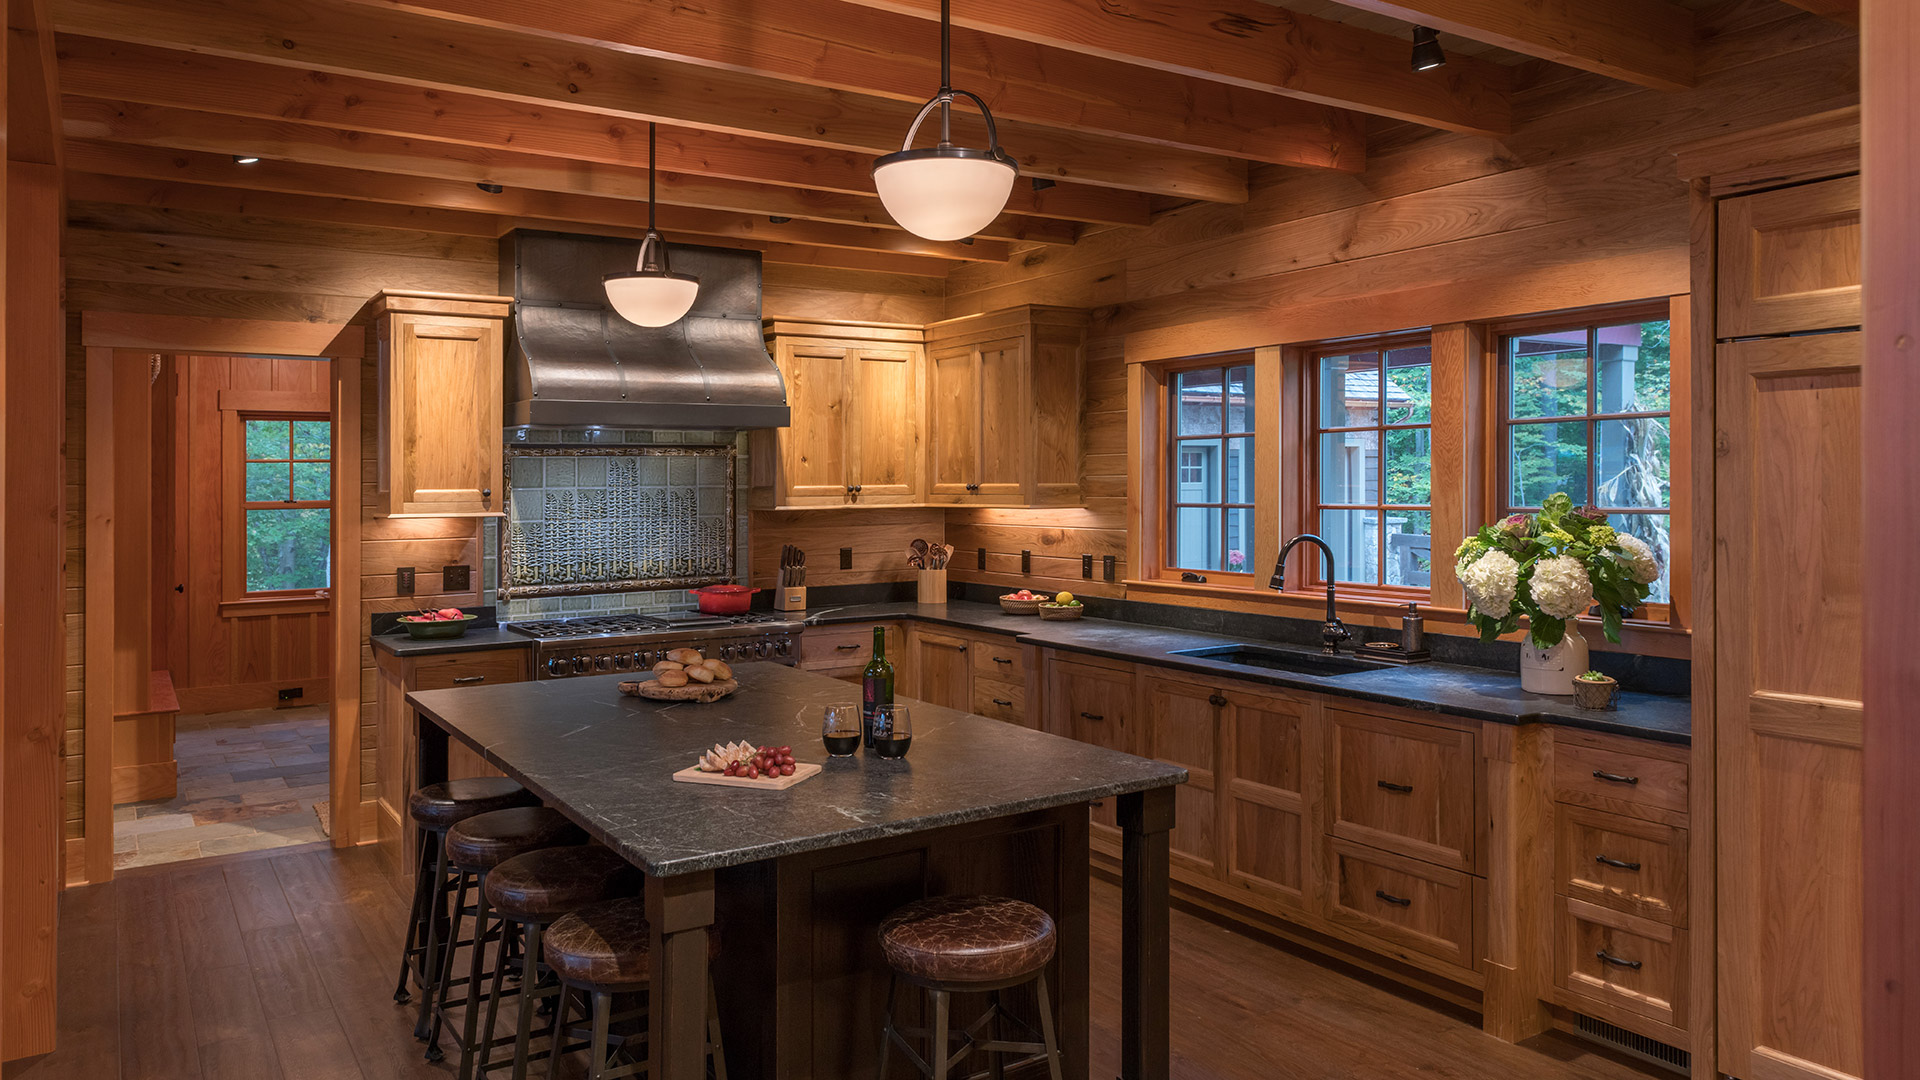 Alton, New Hampshire kitchen with island and butternut cabinets